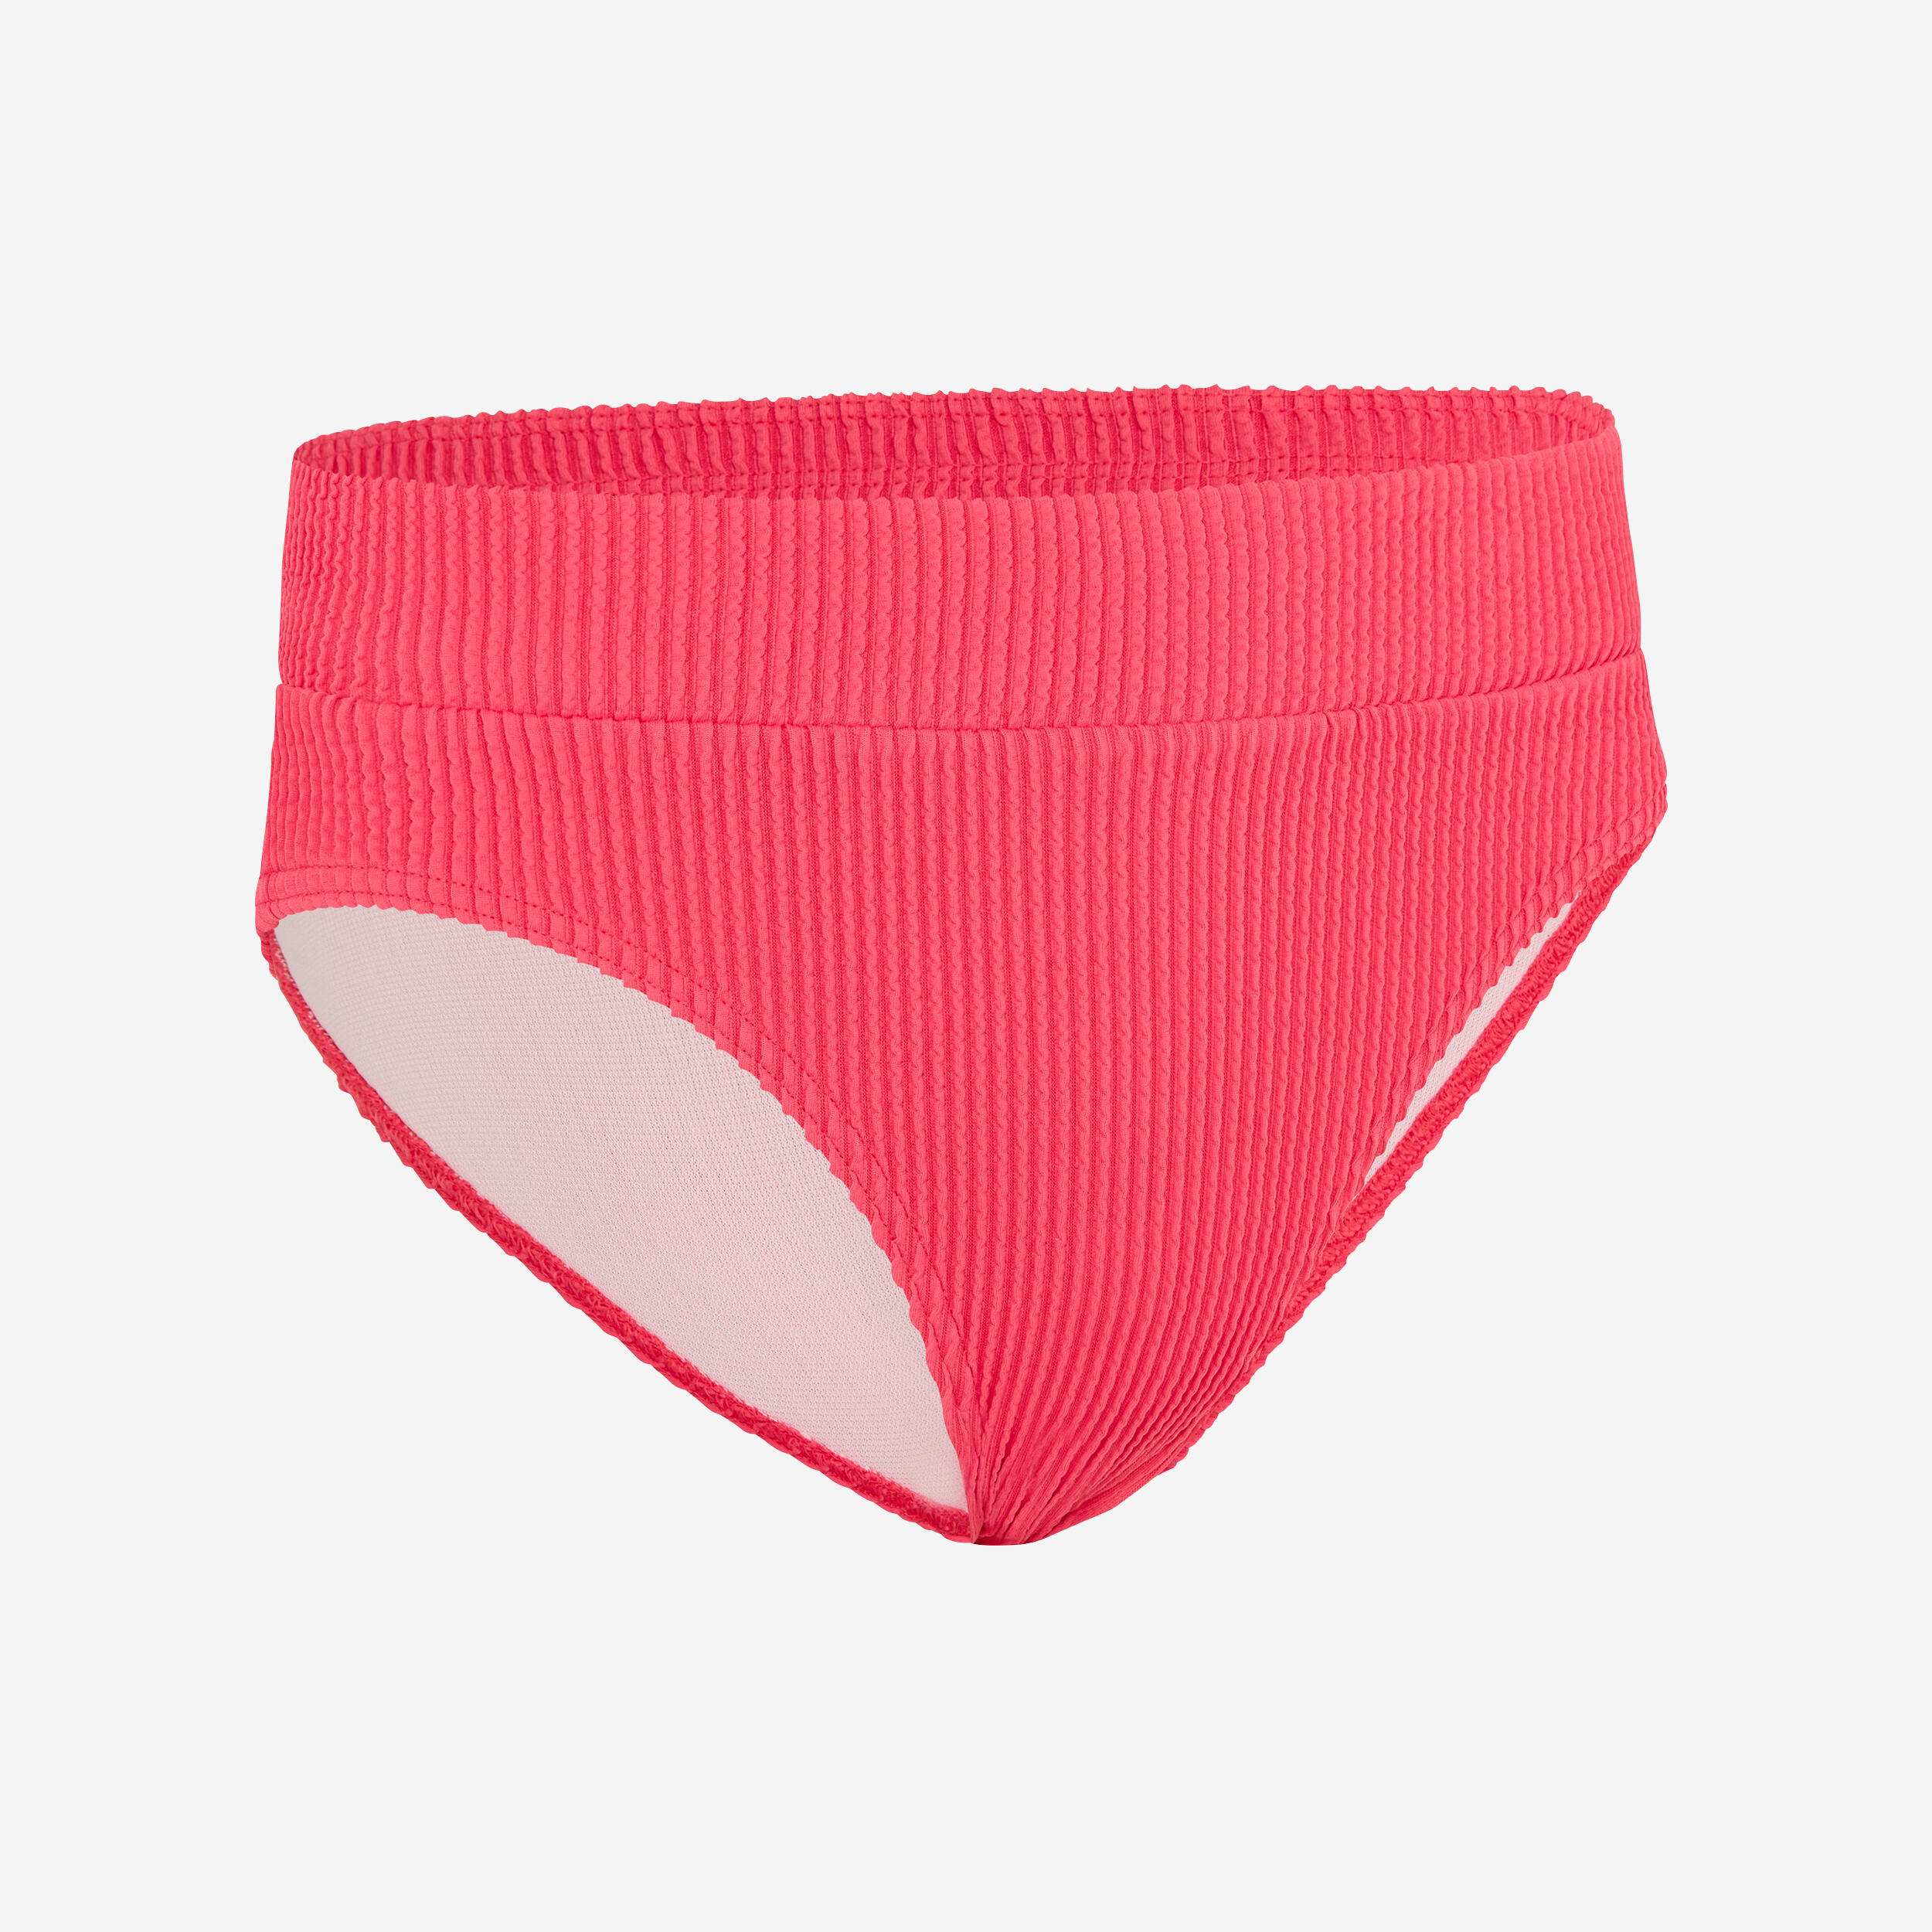 OLAIAN GIRL'S HIGH-WAISTED BAO SWIMSUIT BOTTOMS 500 STRAWBERRY